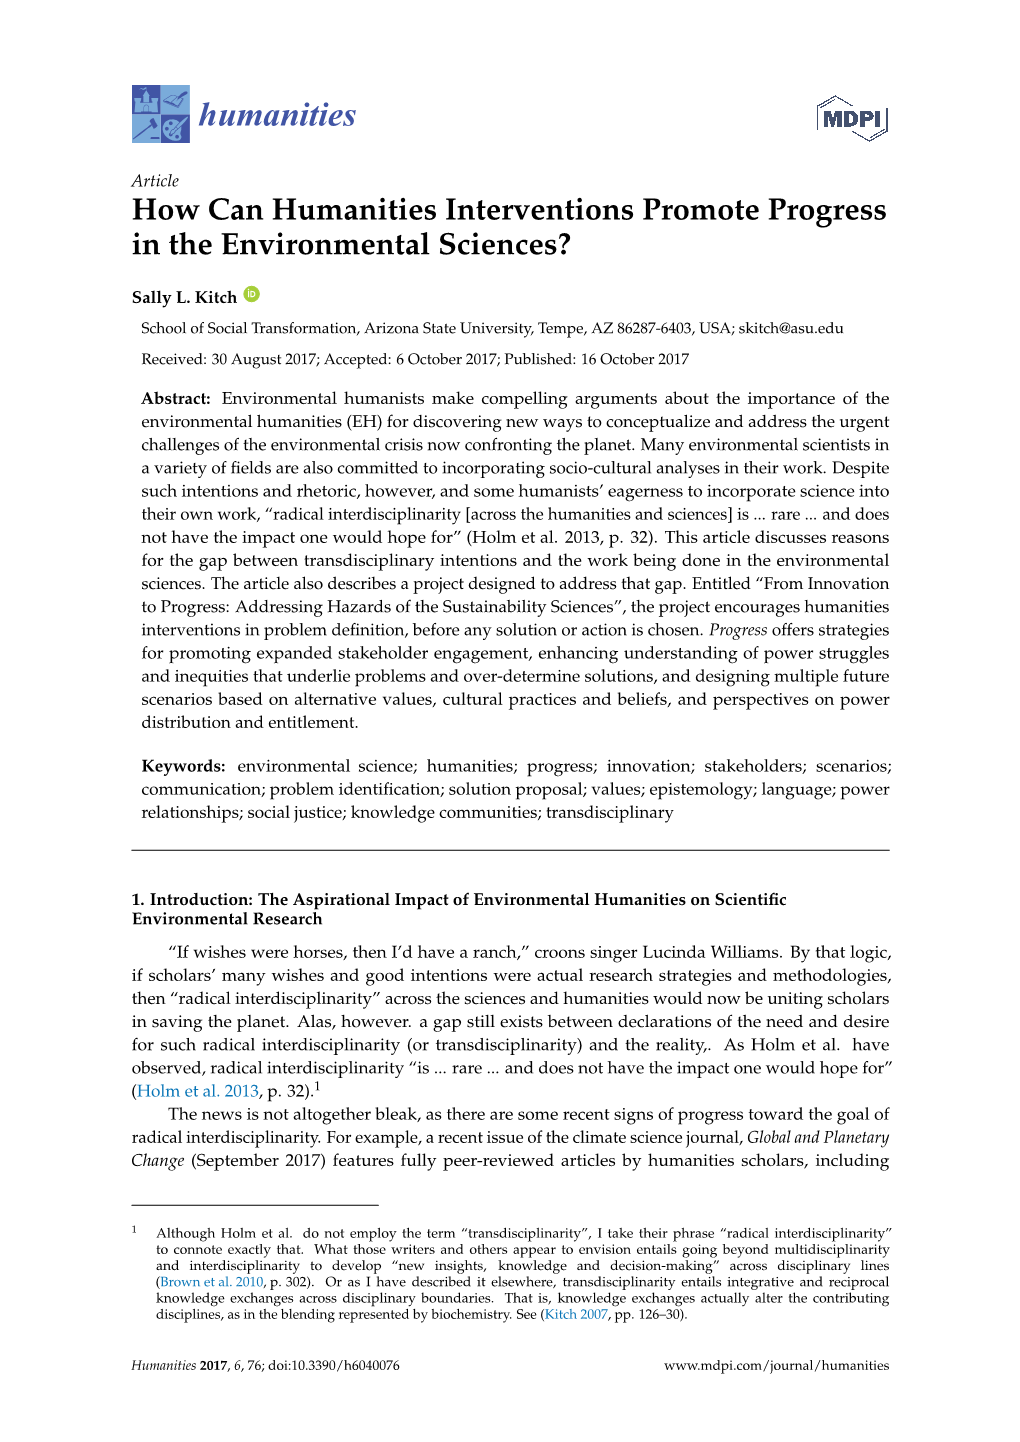 How Can Humanities Interventions Promote Progress in the Environmental Sciences?